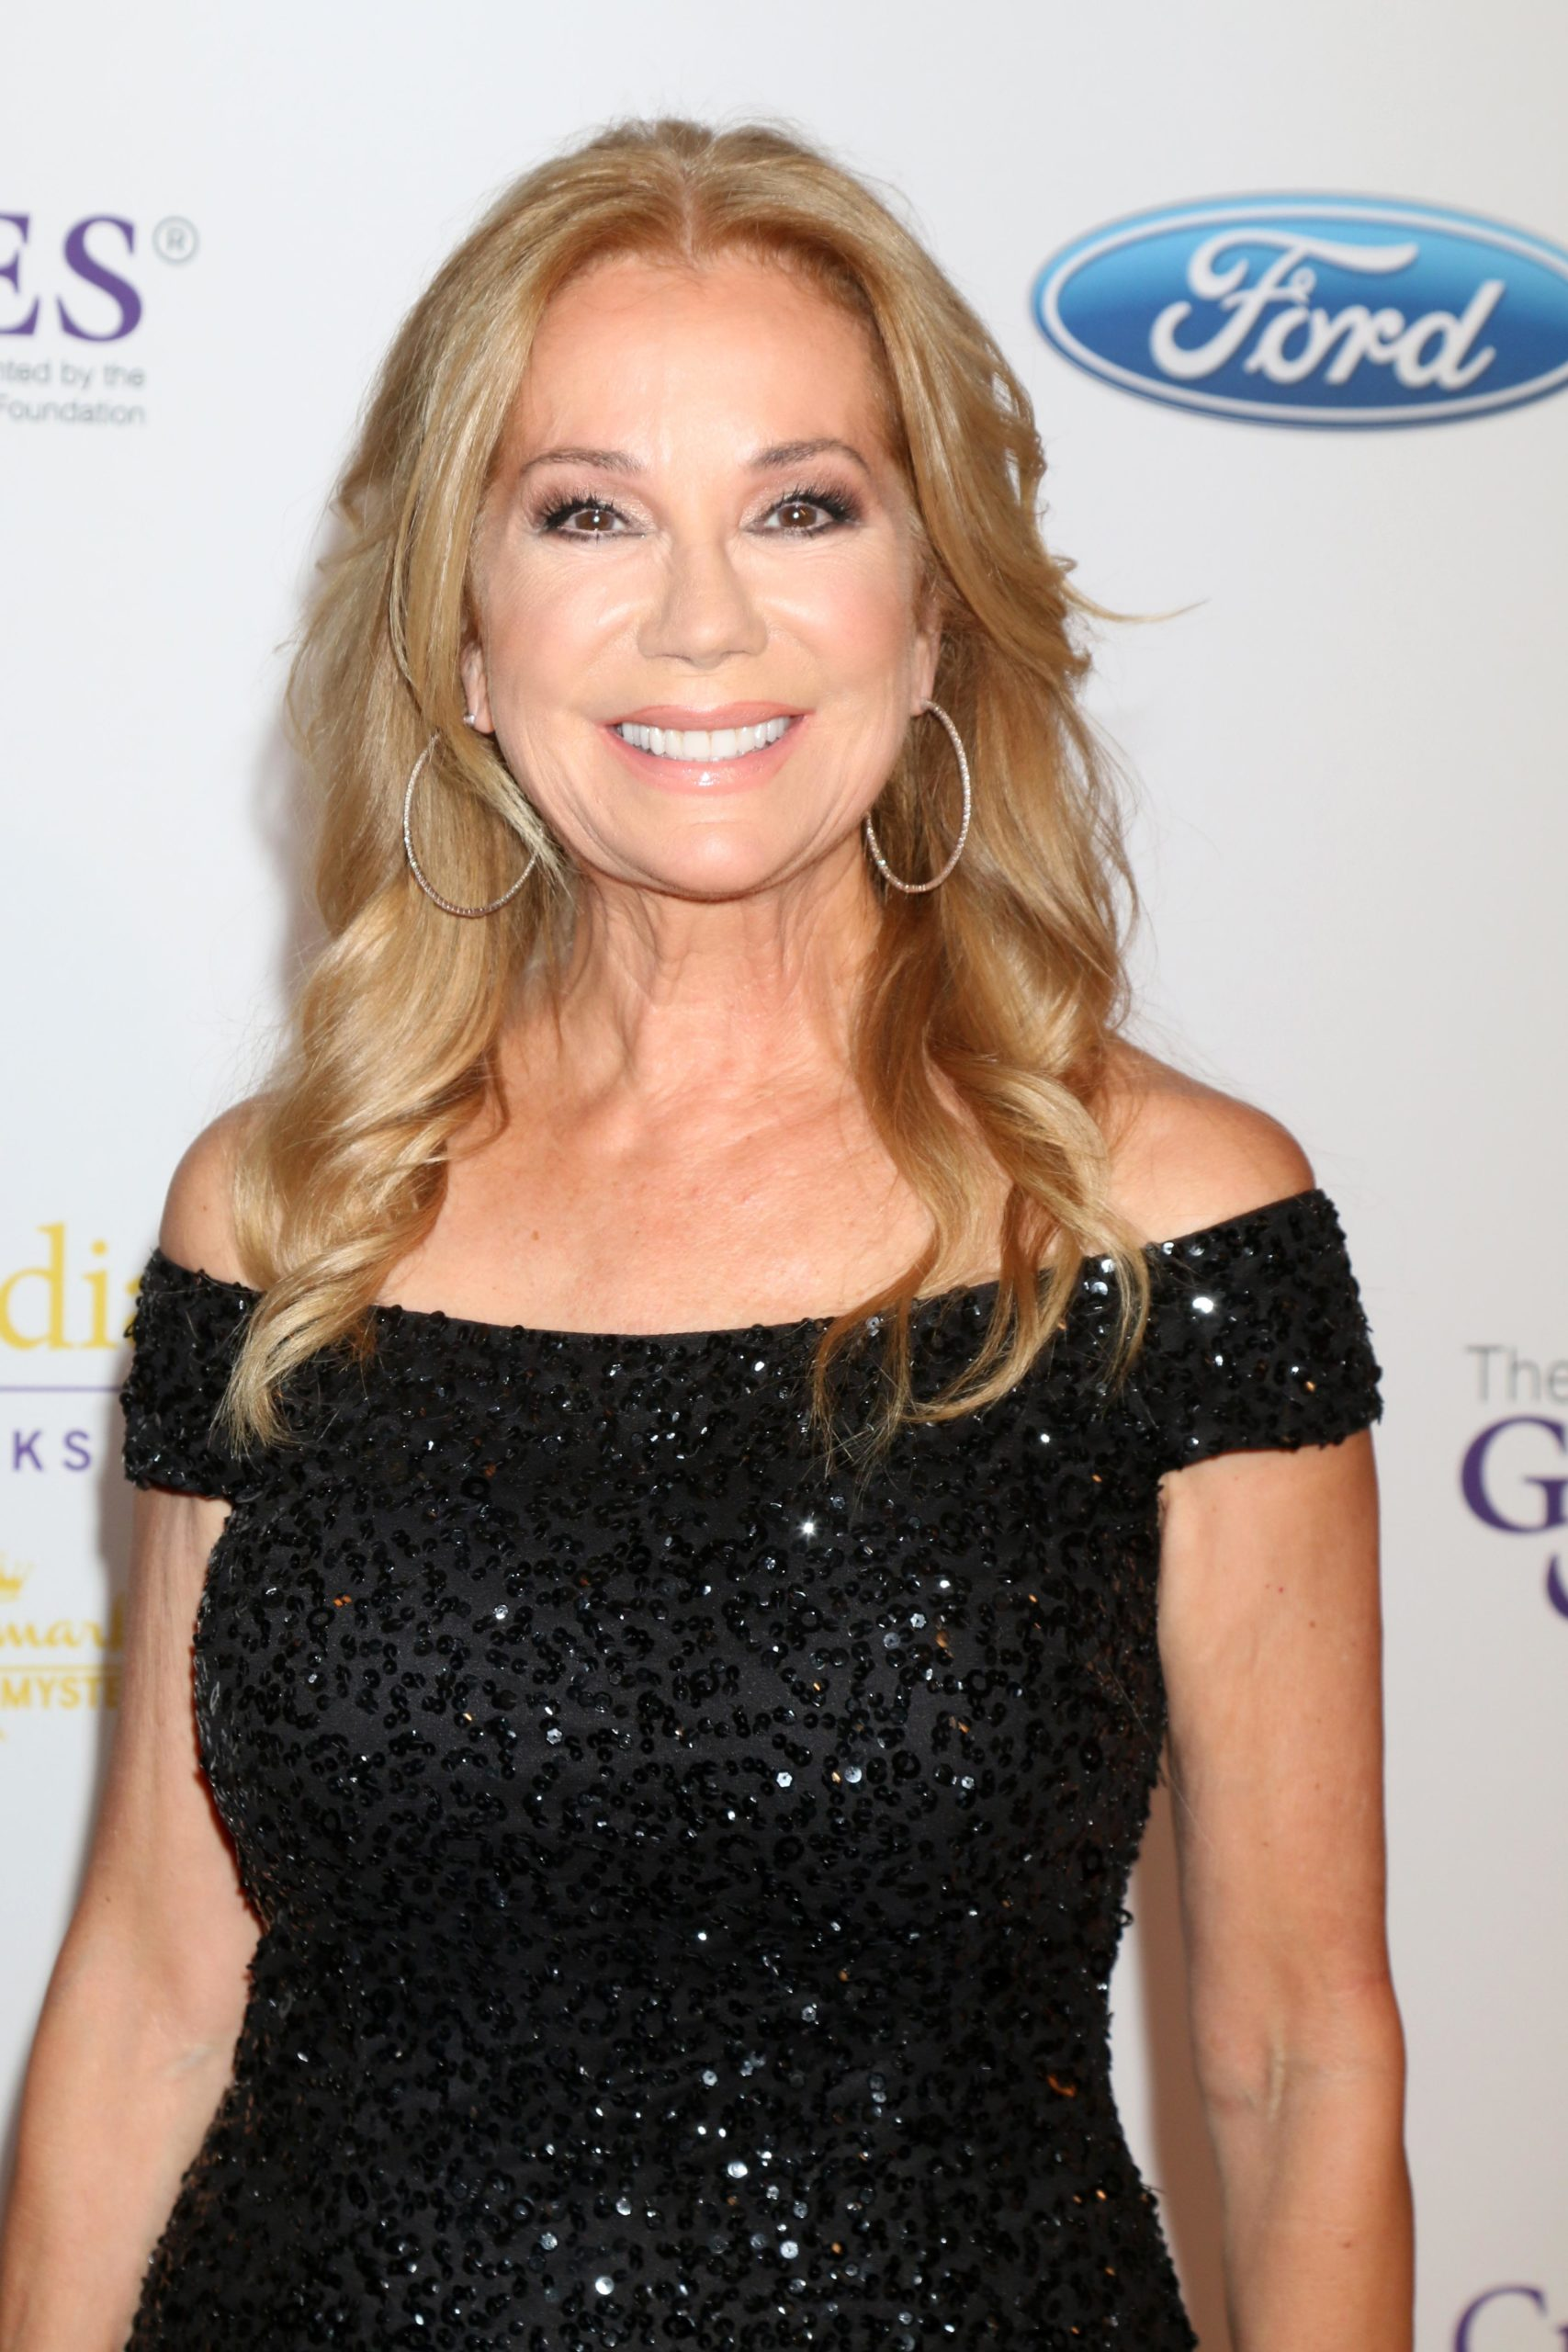 Kathie Lee Gifford: A Journey of Love and Faith